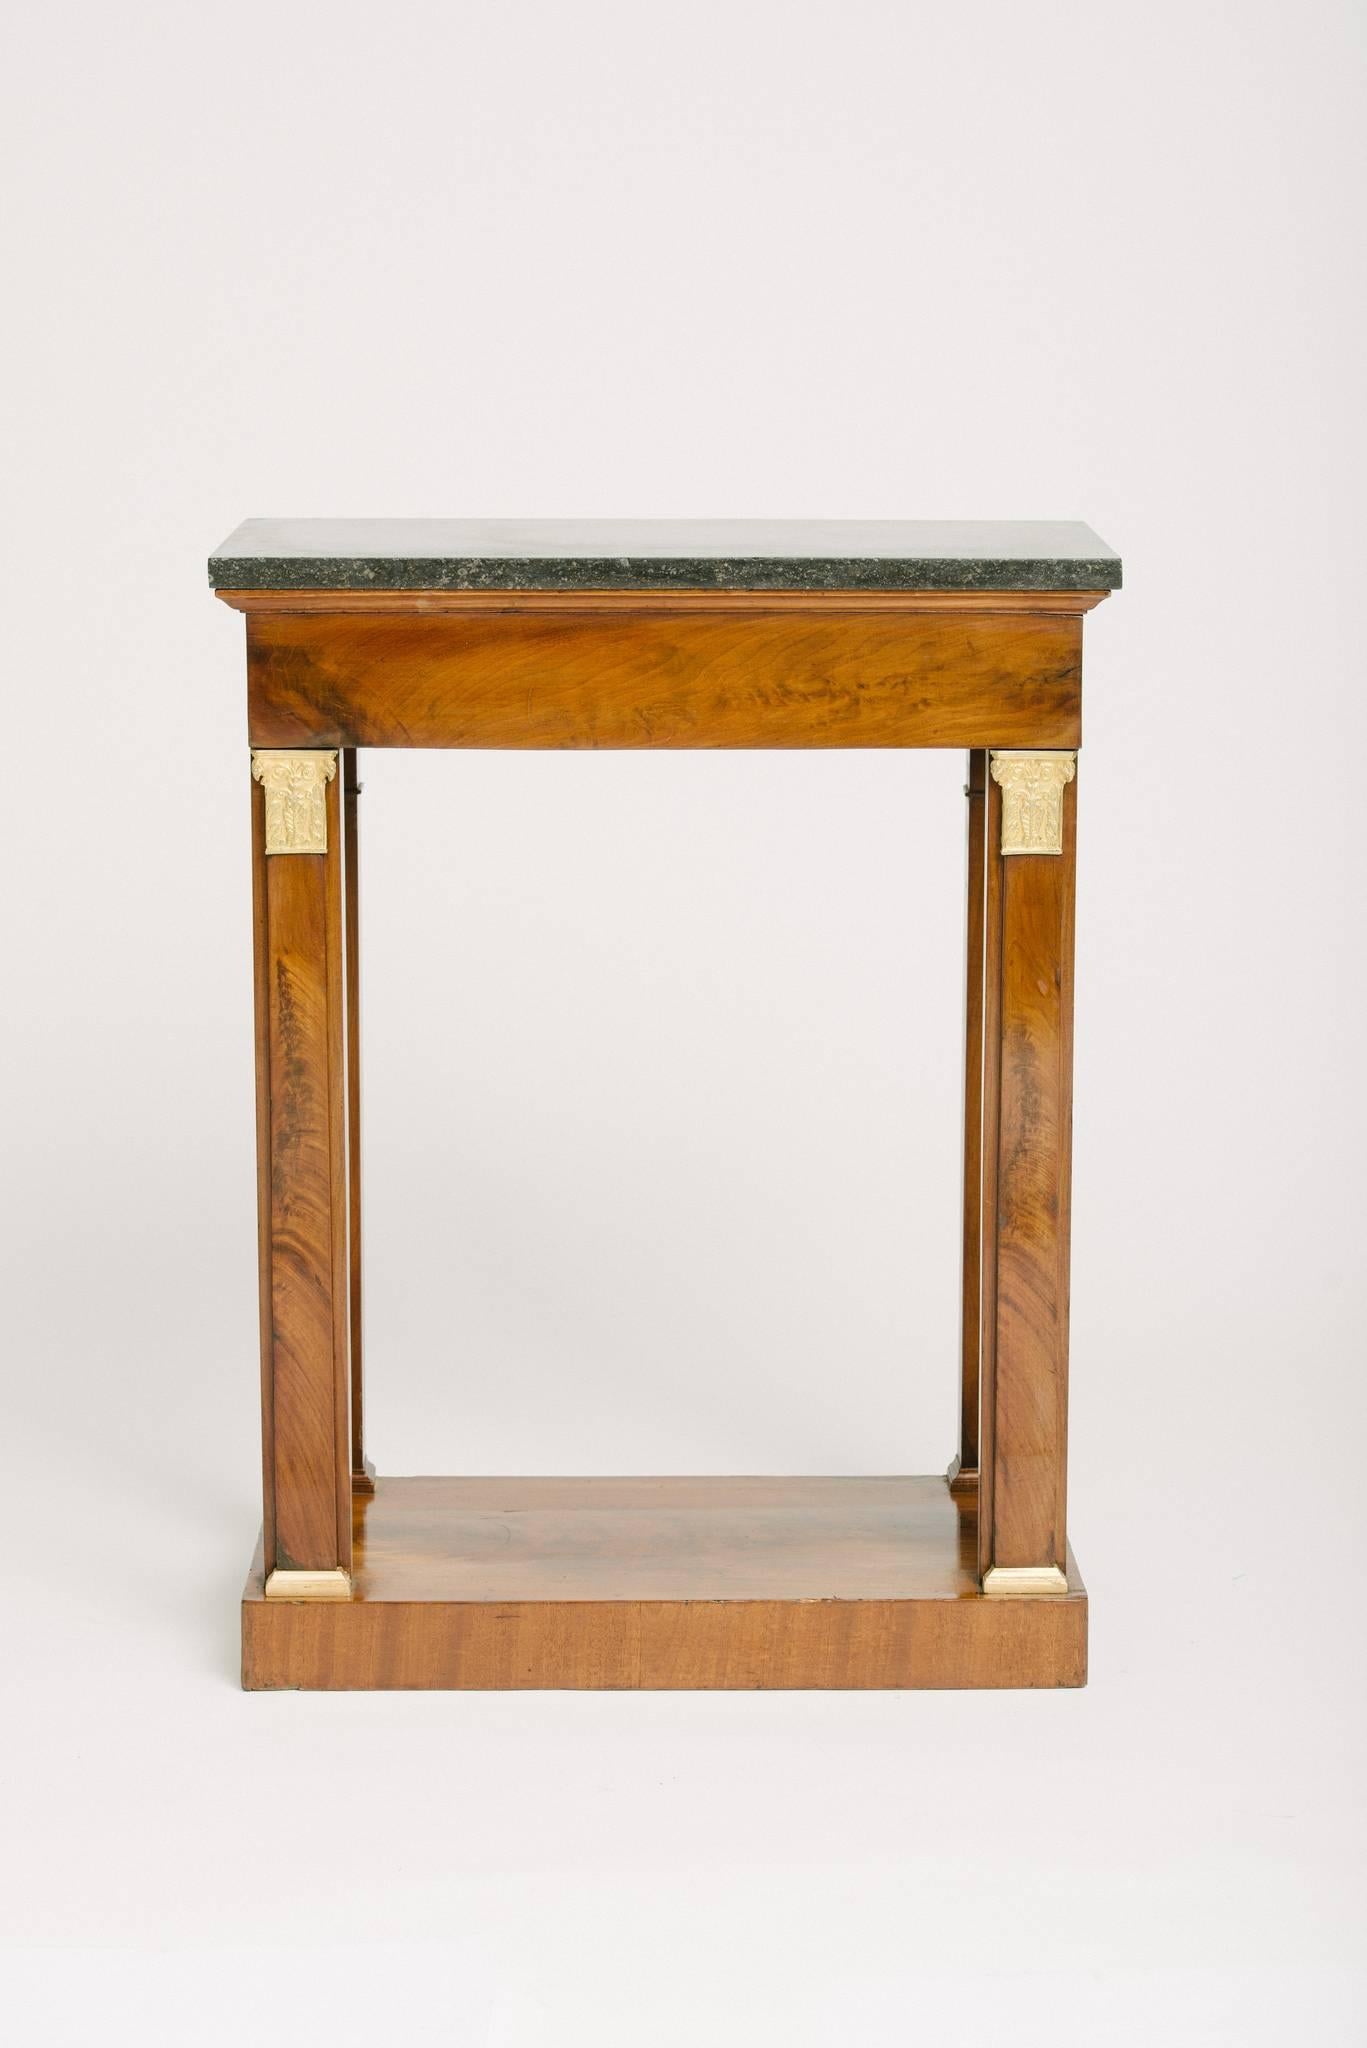 19th century French restoration walnut single drawer console table with black marble-top and gilt ormolu detail.